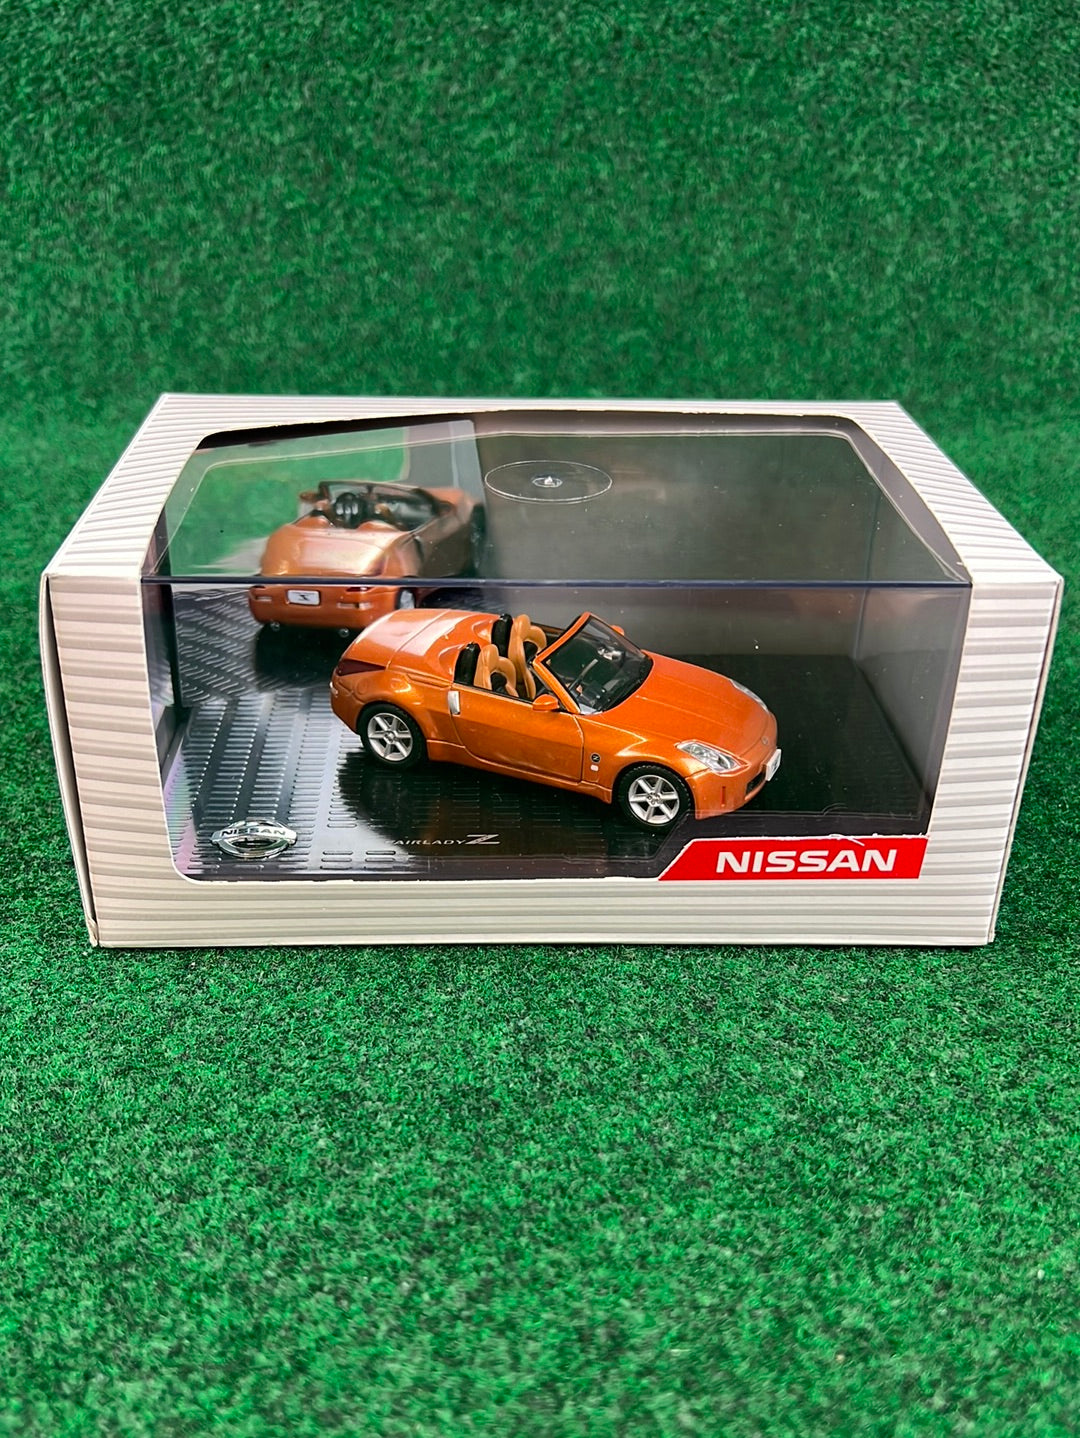 NISSAN Official - KYOSHO Produced: Nissan Z33 Fairlady Z Convertible - 1/43  Scale Diecast